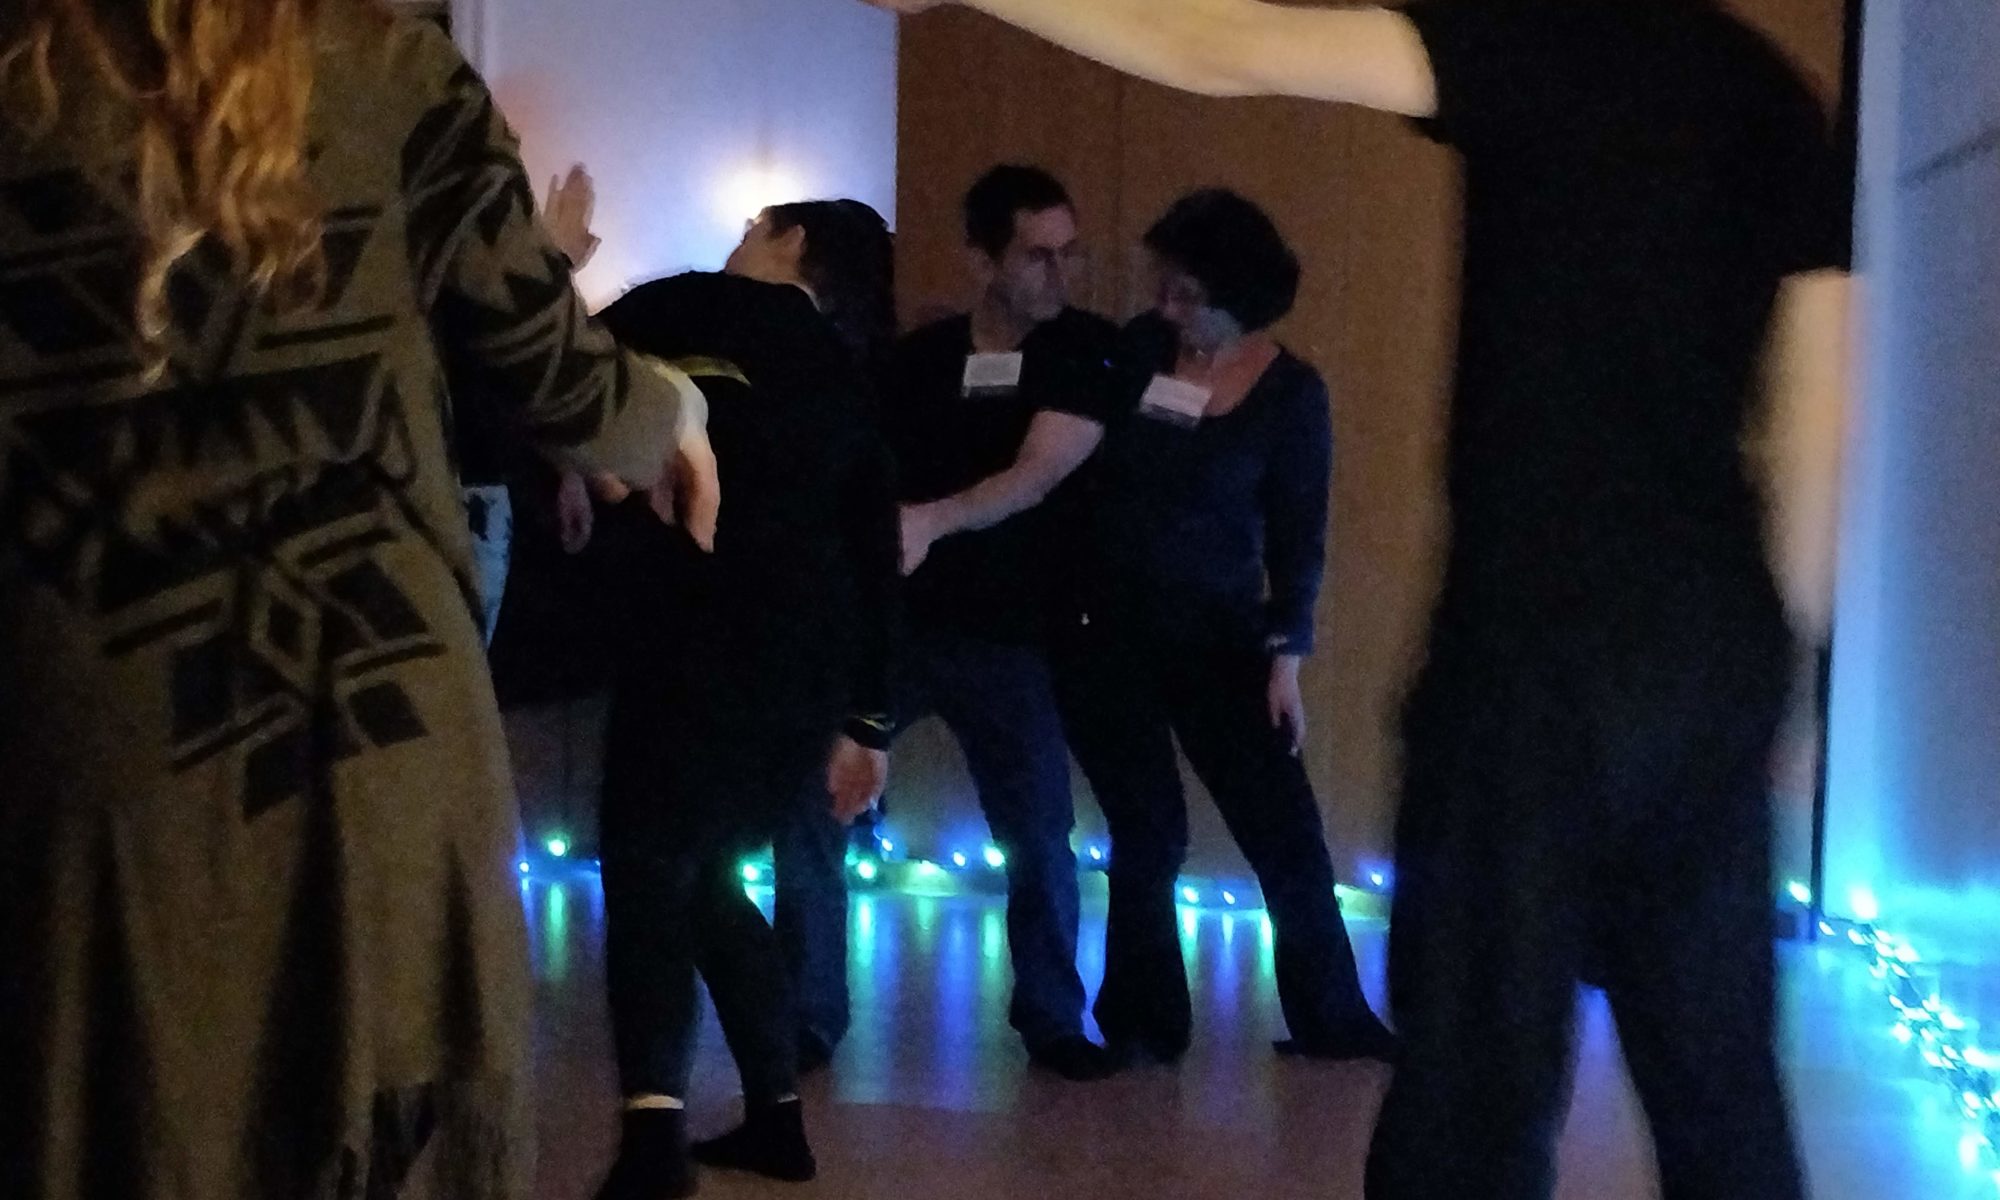 People dance in a dimly lit room. Two move lean into one another, sharing weight. One person the the foreground thrusts out an outstretched hand to another person.